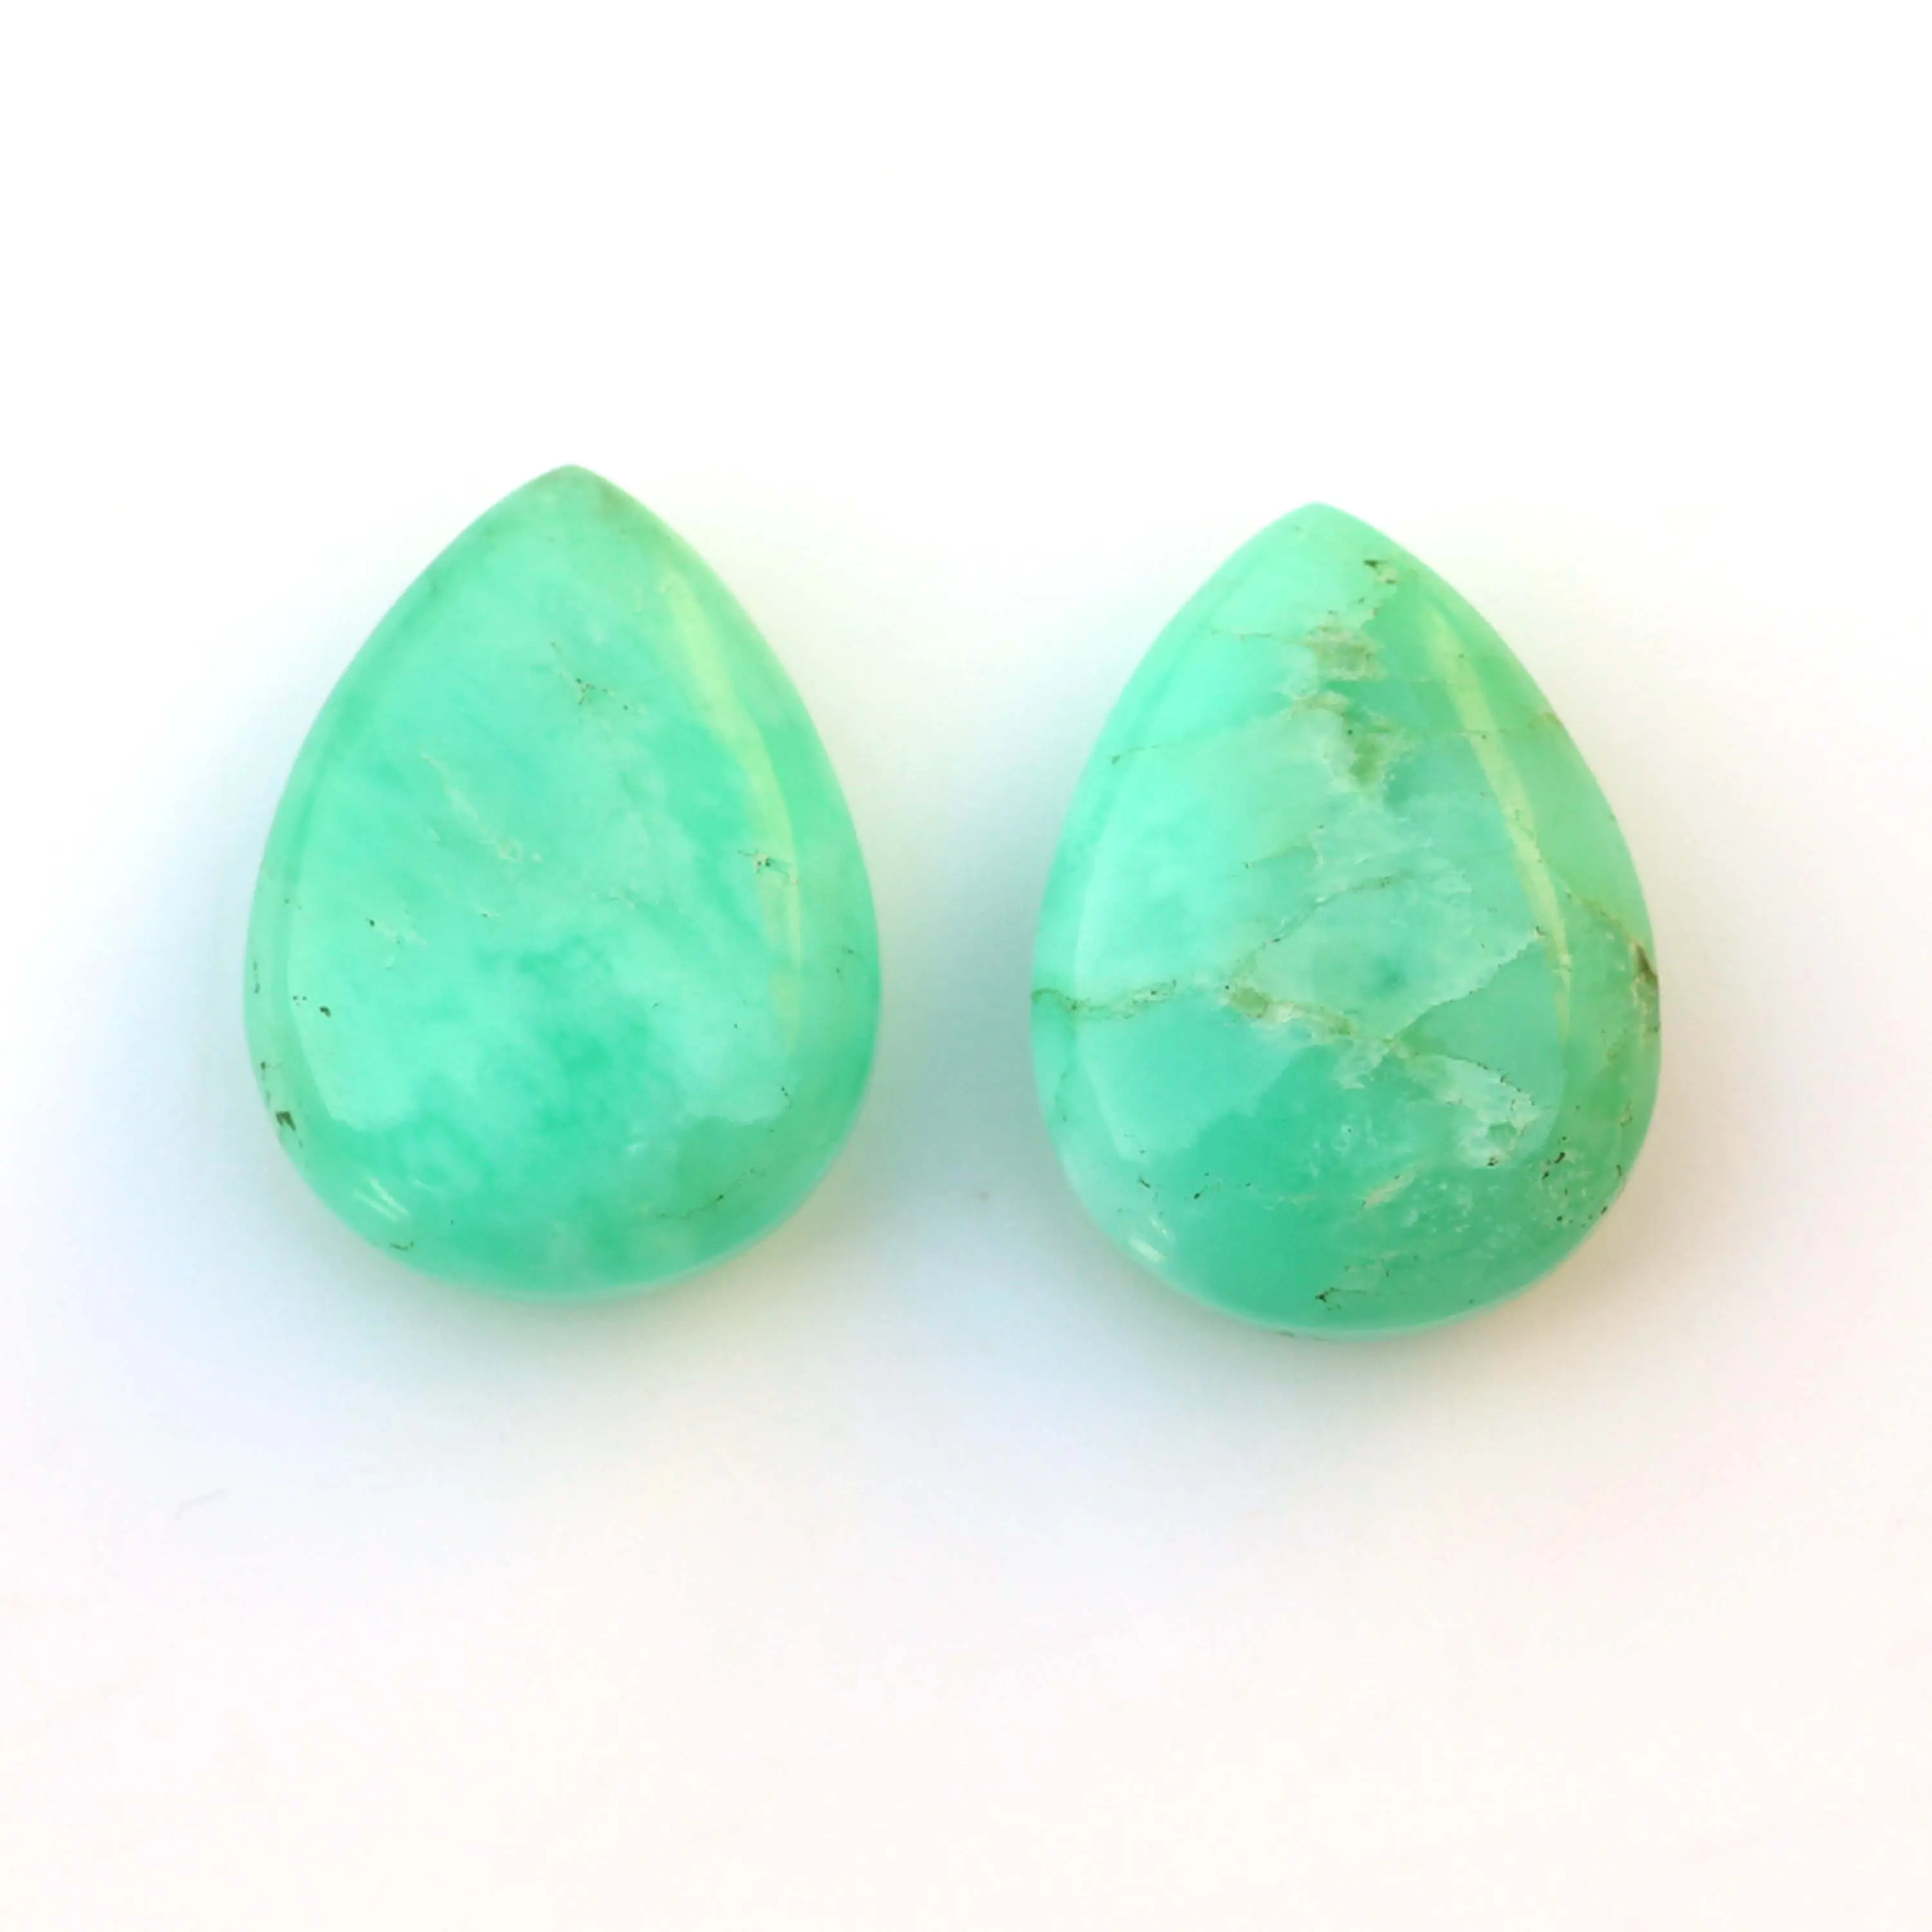 12x16mm Best Quality Natural Creamy Green Chrysoprase Smooth Gemstone Pear Shape Briolette Calibrated Gemstone Jewelry Making